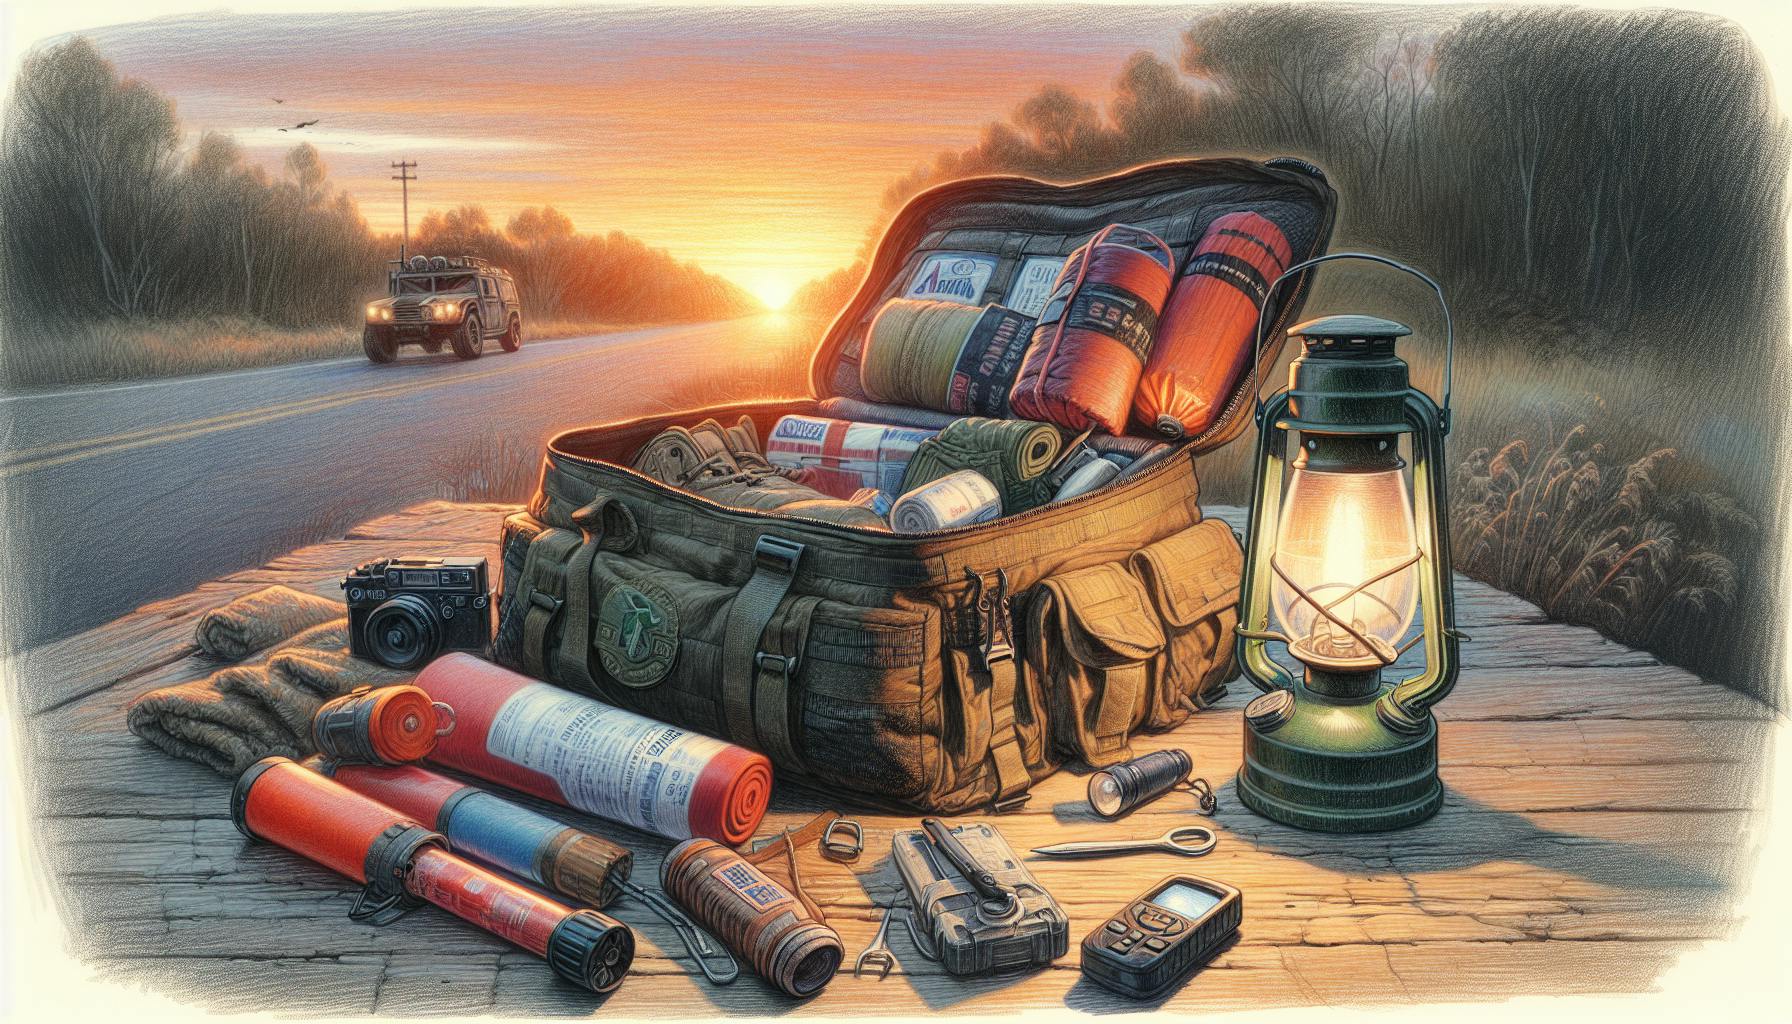 Road Side Emergency Kits: Your Survival Guide